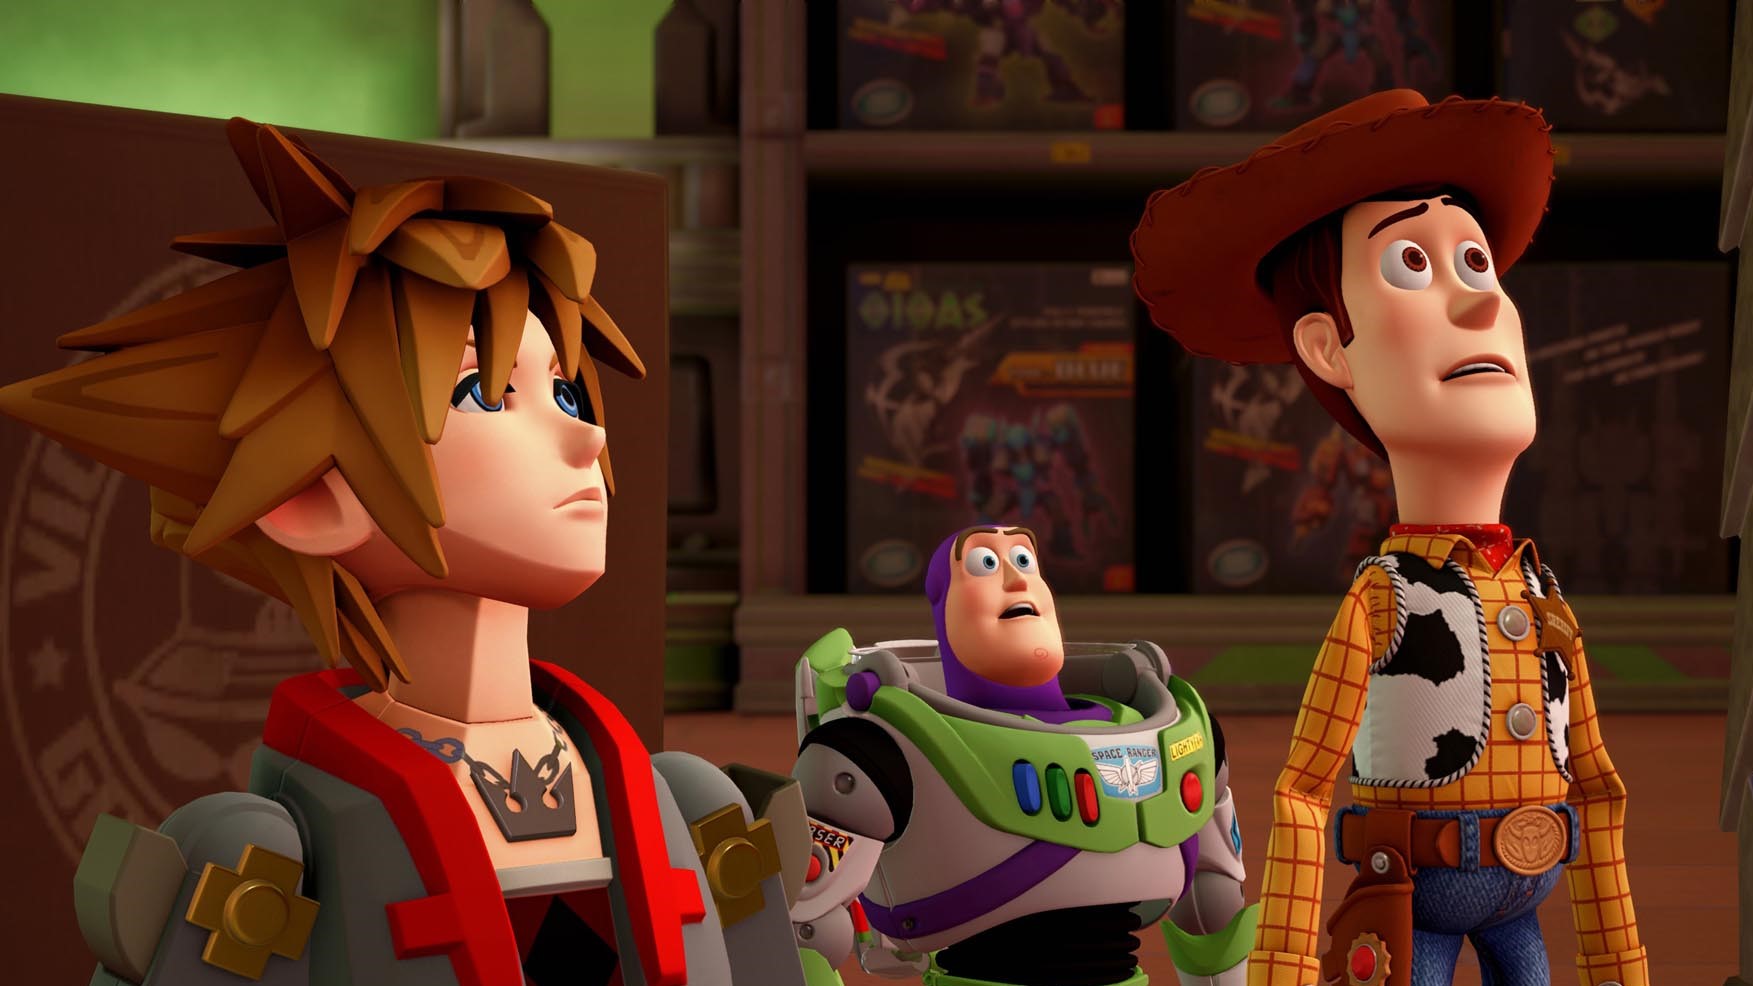  Kingdom Hearts is coming to PC as an Epic Store exclusive 